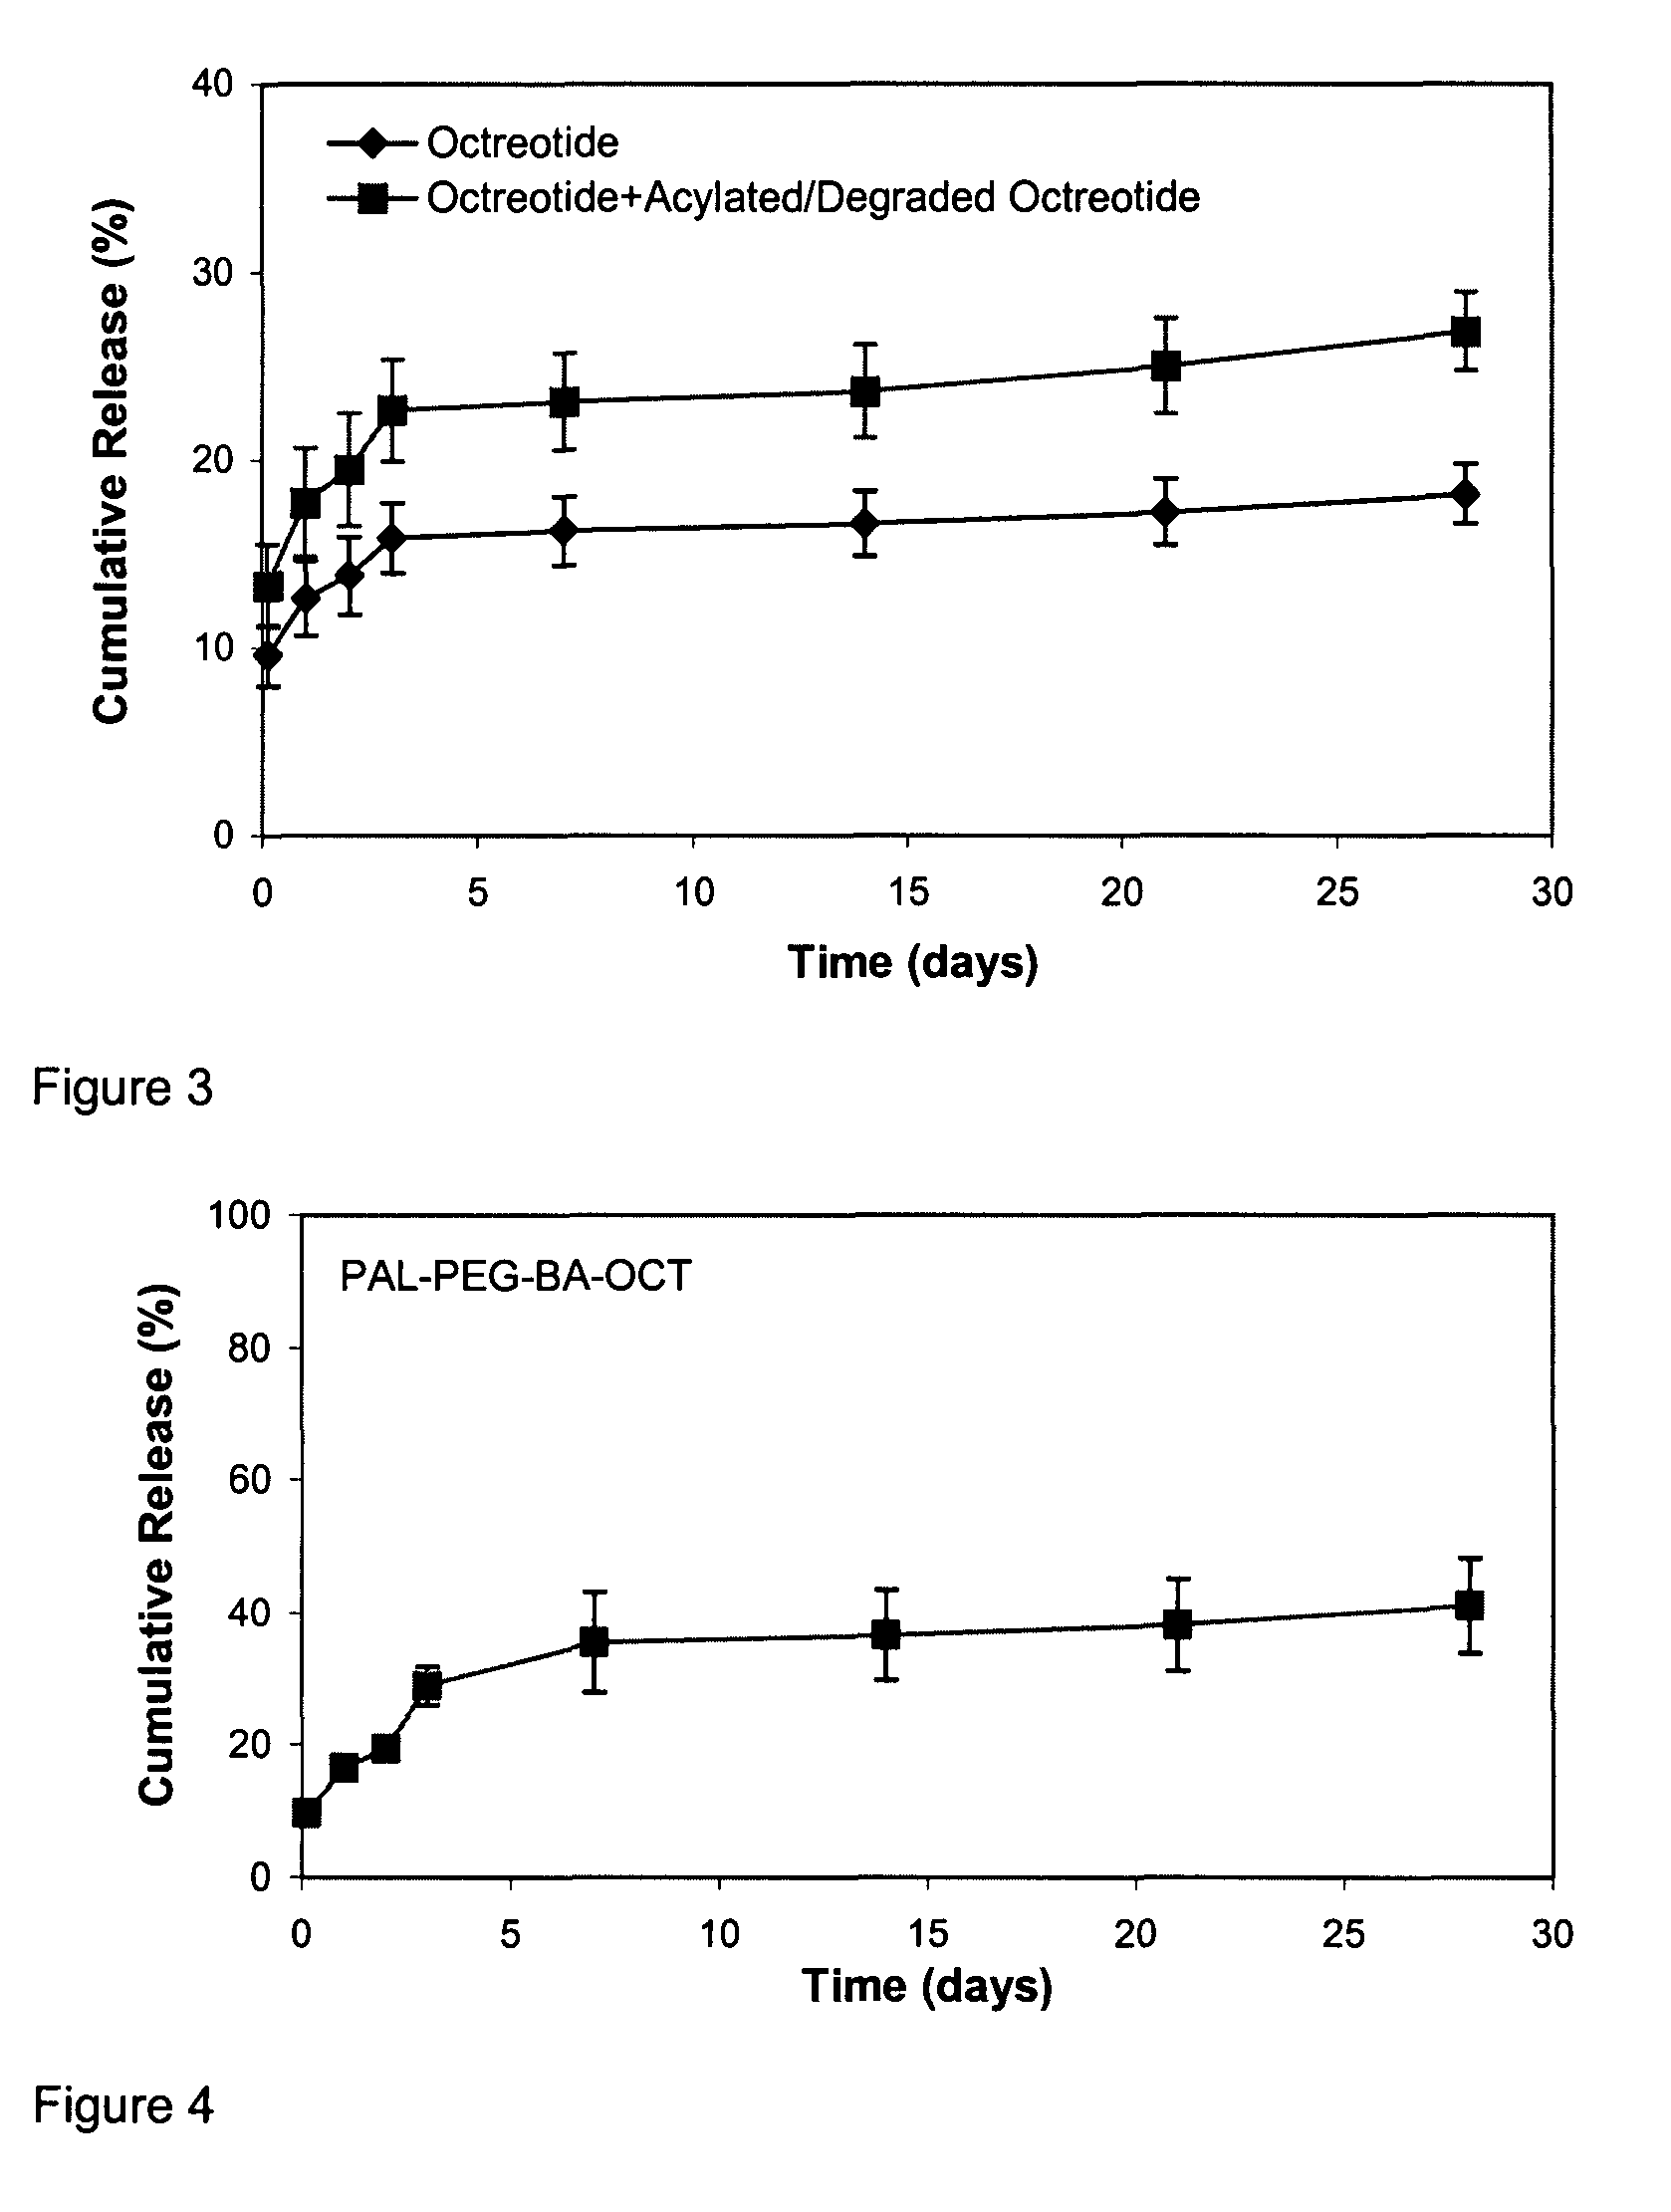 Pharmaceutical compositions for sustained release delivery of peptides